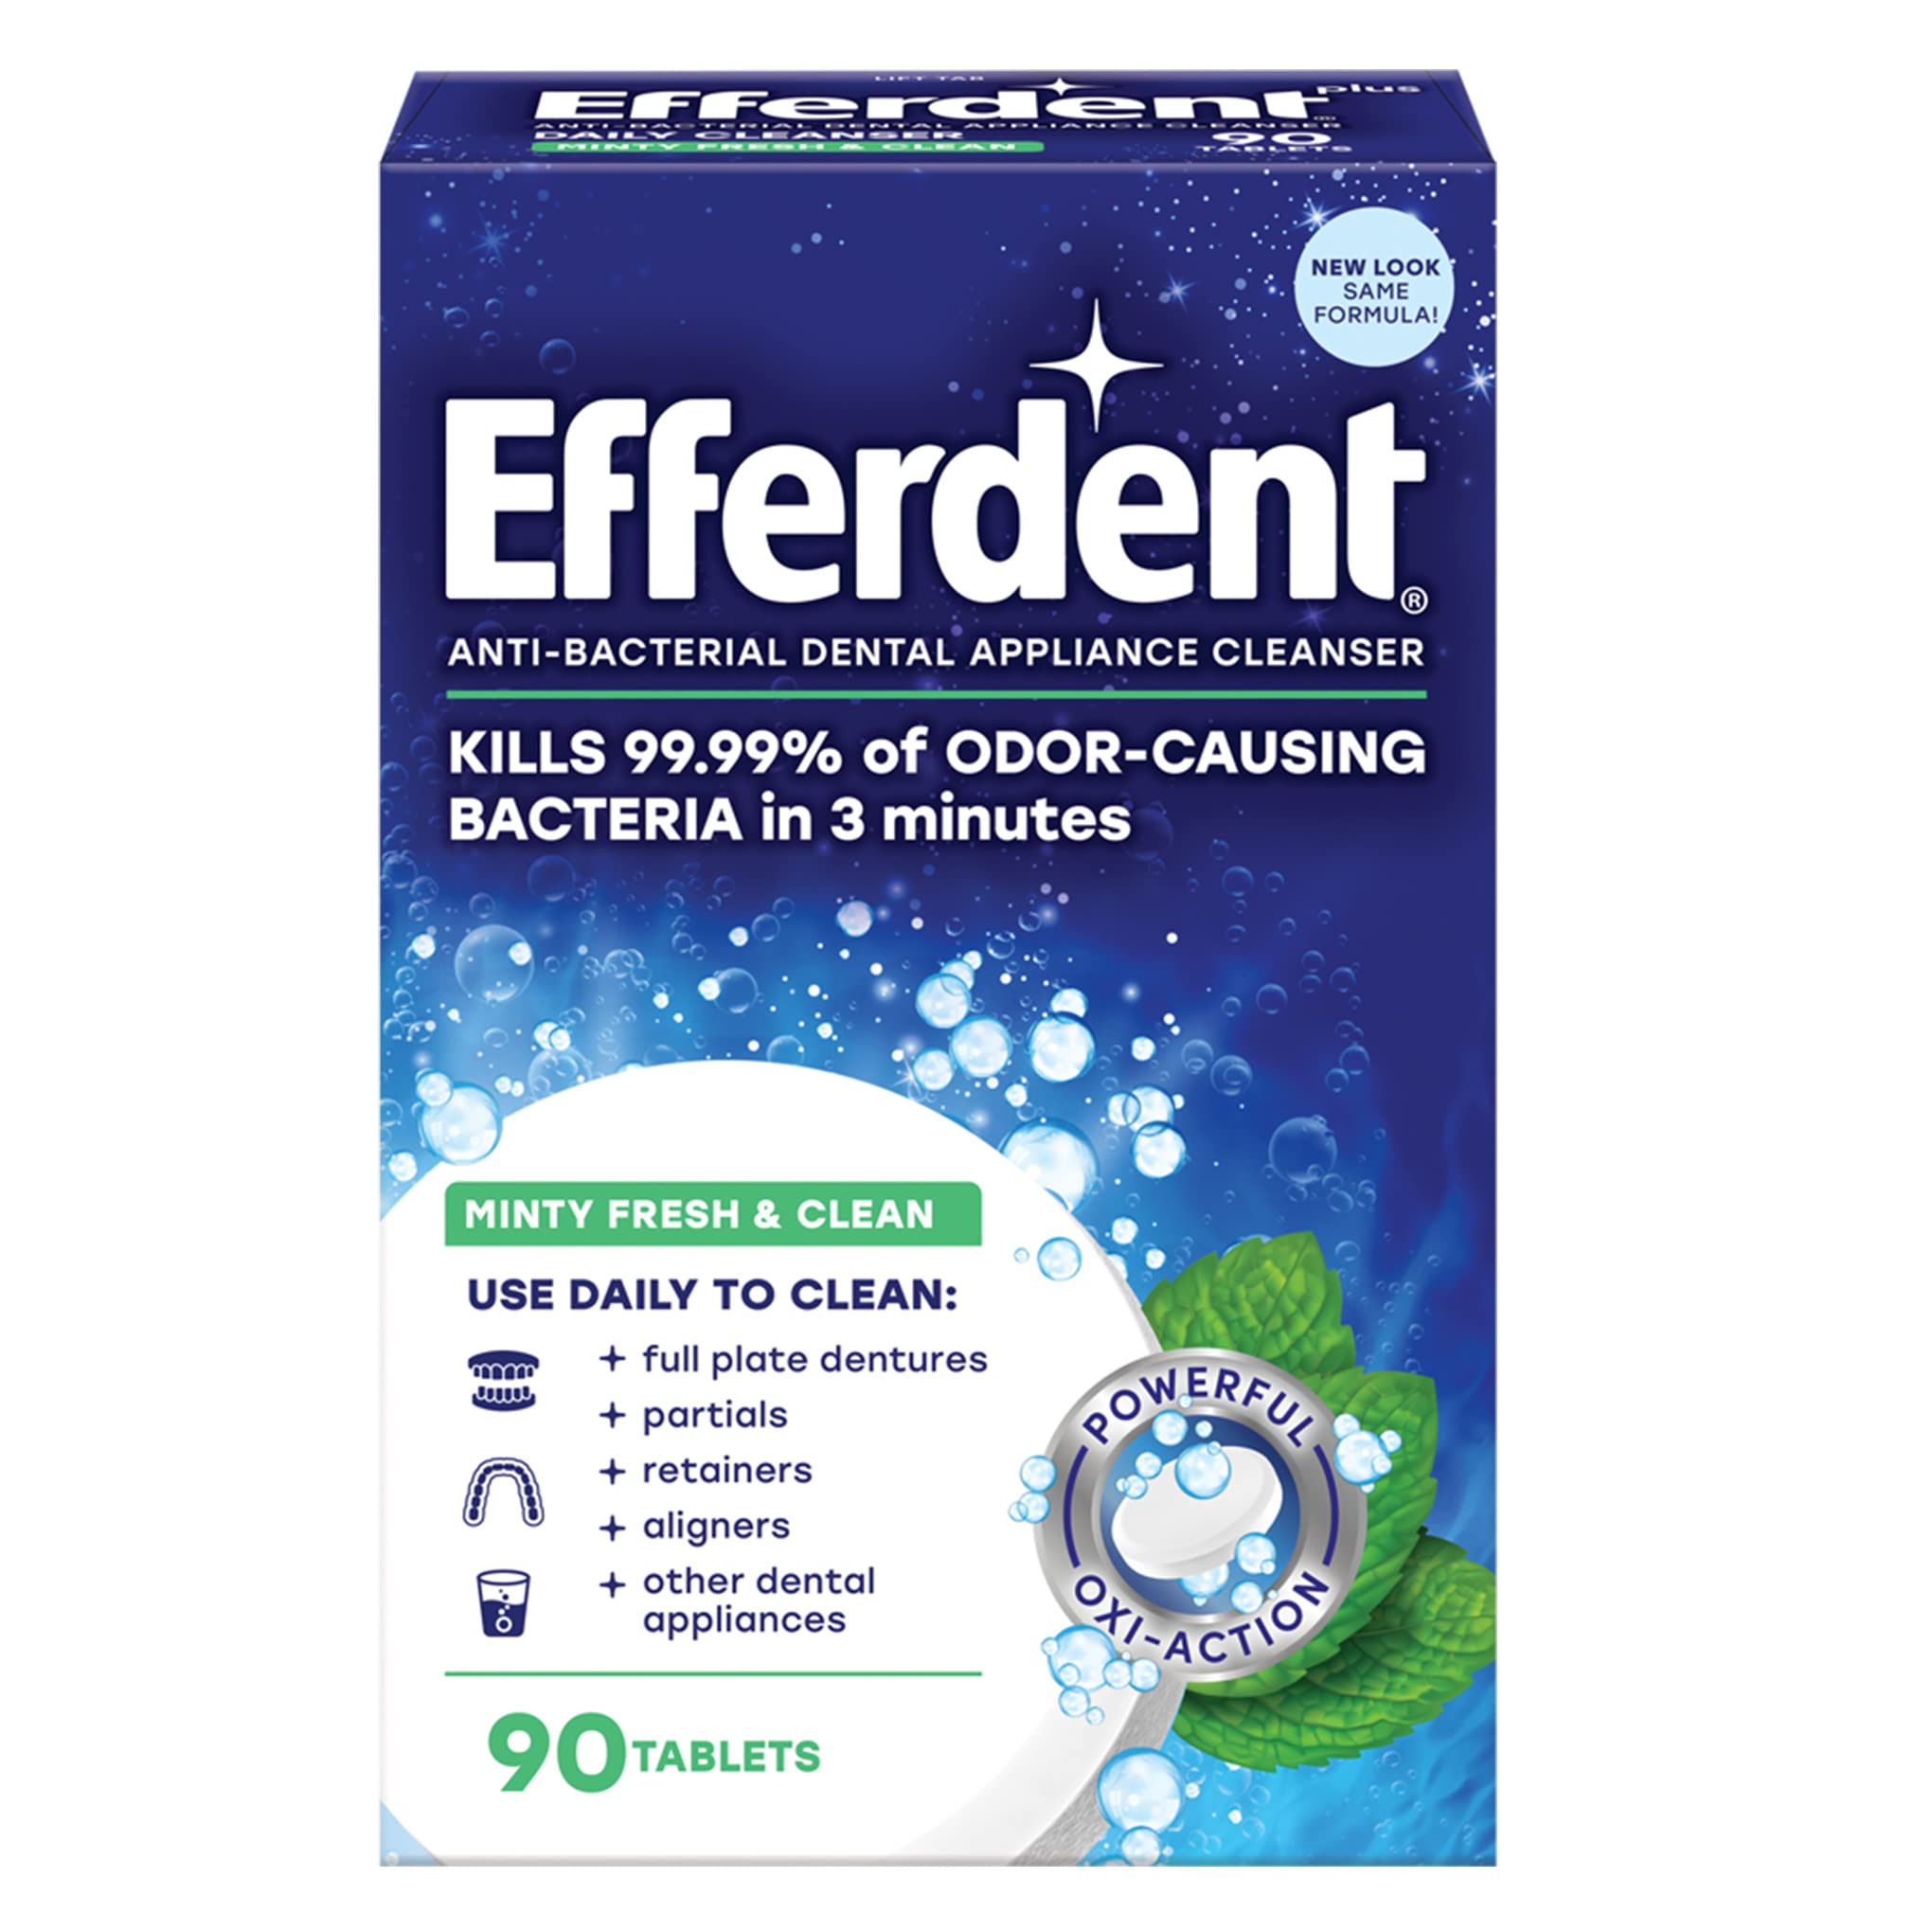 90-Count Efferdent Anti-Bacterial Dental Appliance Cleaning Tablets (Minty Fresh & Clean) $3.90 w/ S&S + Free Shipping w/ Prime or on $25+